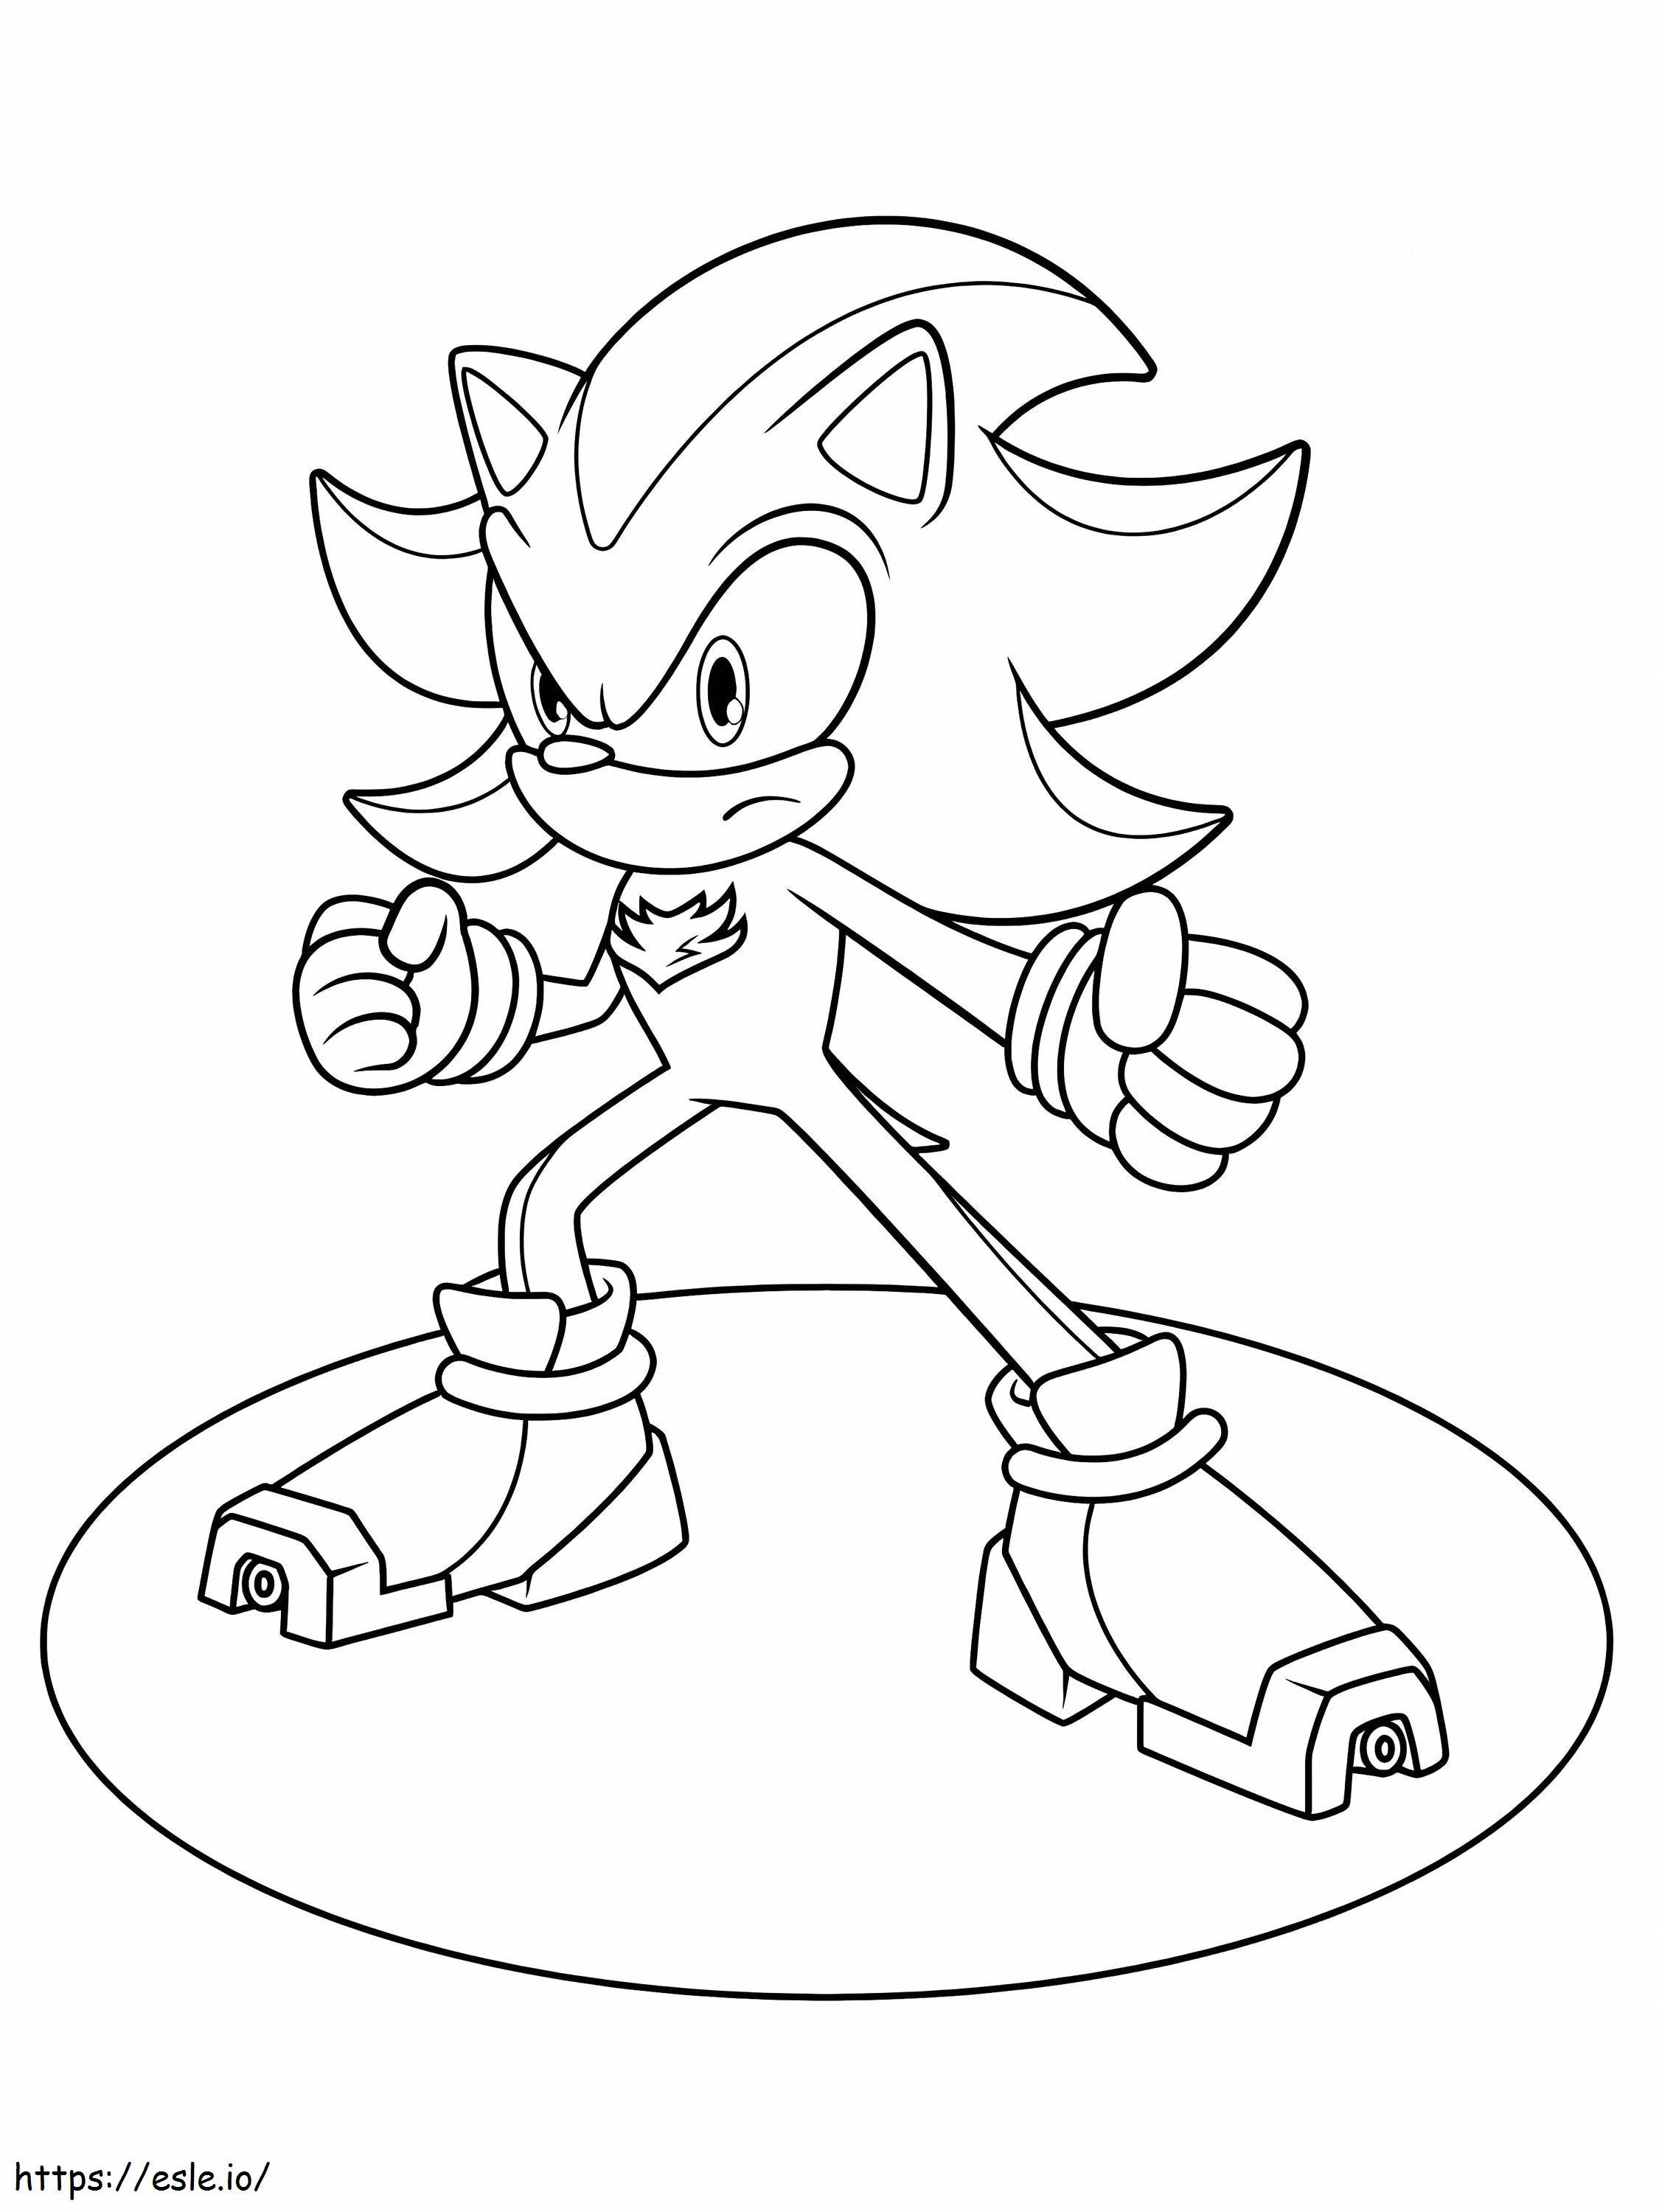 Shadow The Hedgehog To Print coloring page